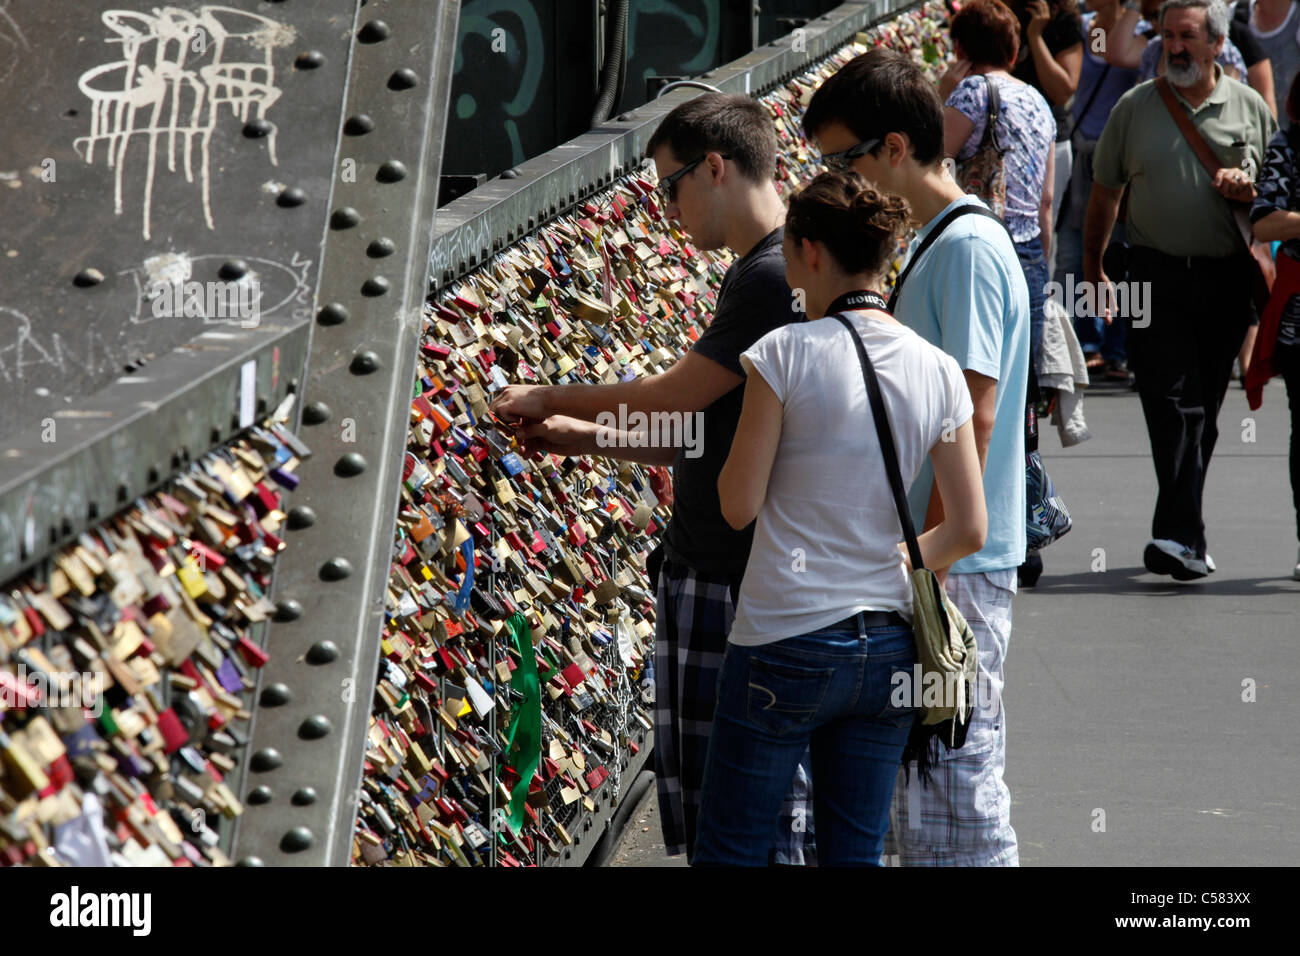 Hohenzollern-bridge over river Rhine in Cologne, Germany. Lovers hang padlocks with their names on it, symbol for eternal love. Stock Photo